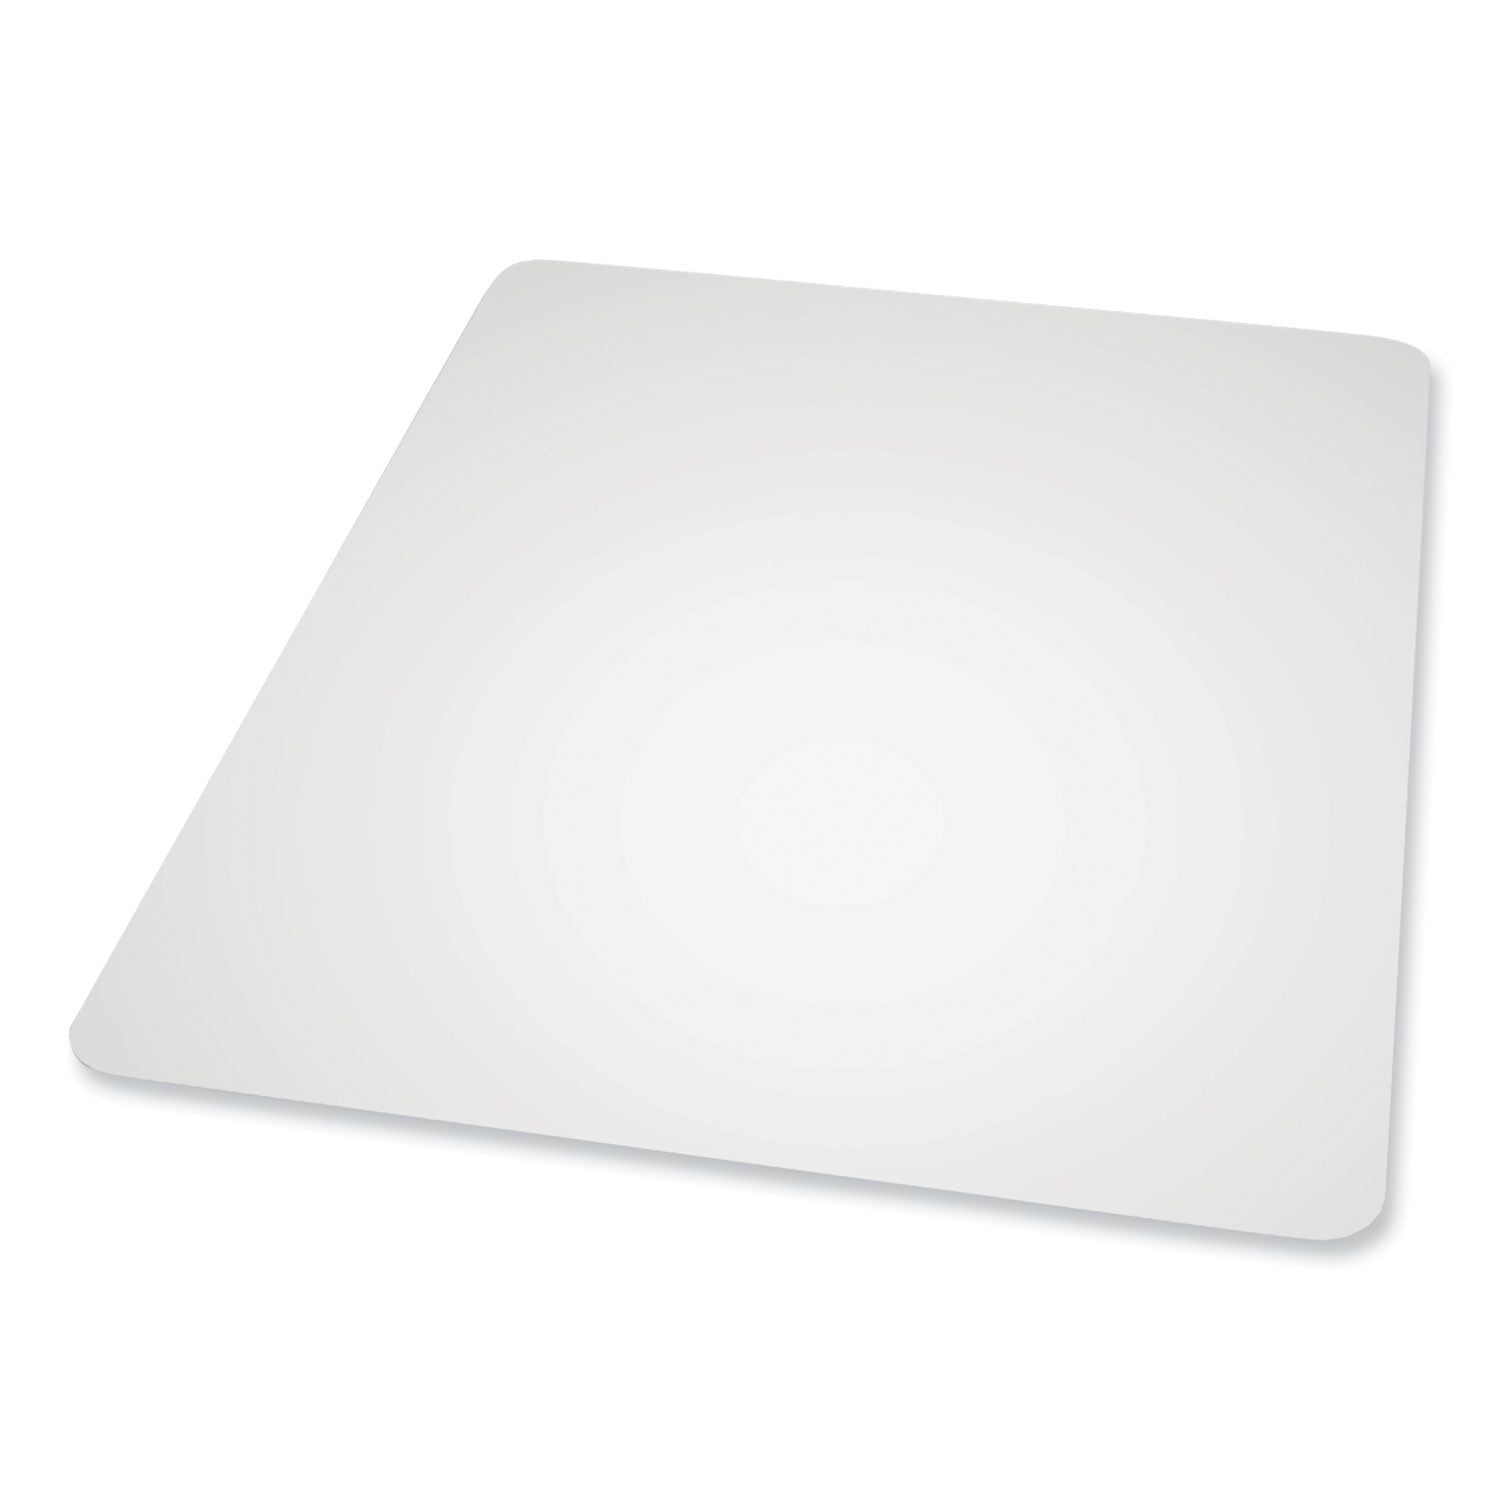 everlife-chair-mat-for-hard-floors-heavy-use-rectangular-60-x-96-clear-ships-in-4-6-business-days_esr132831 - 1